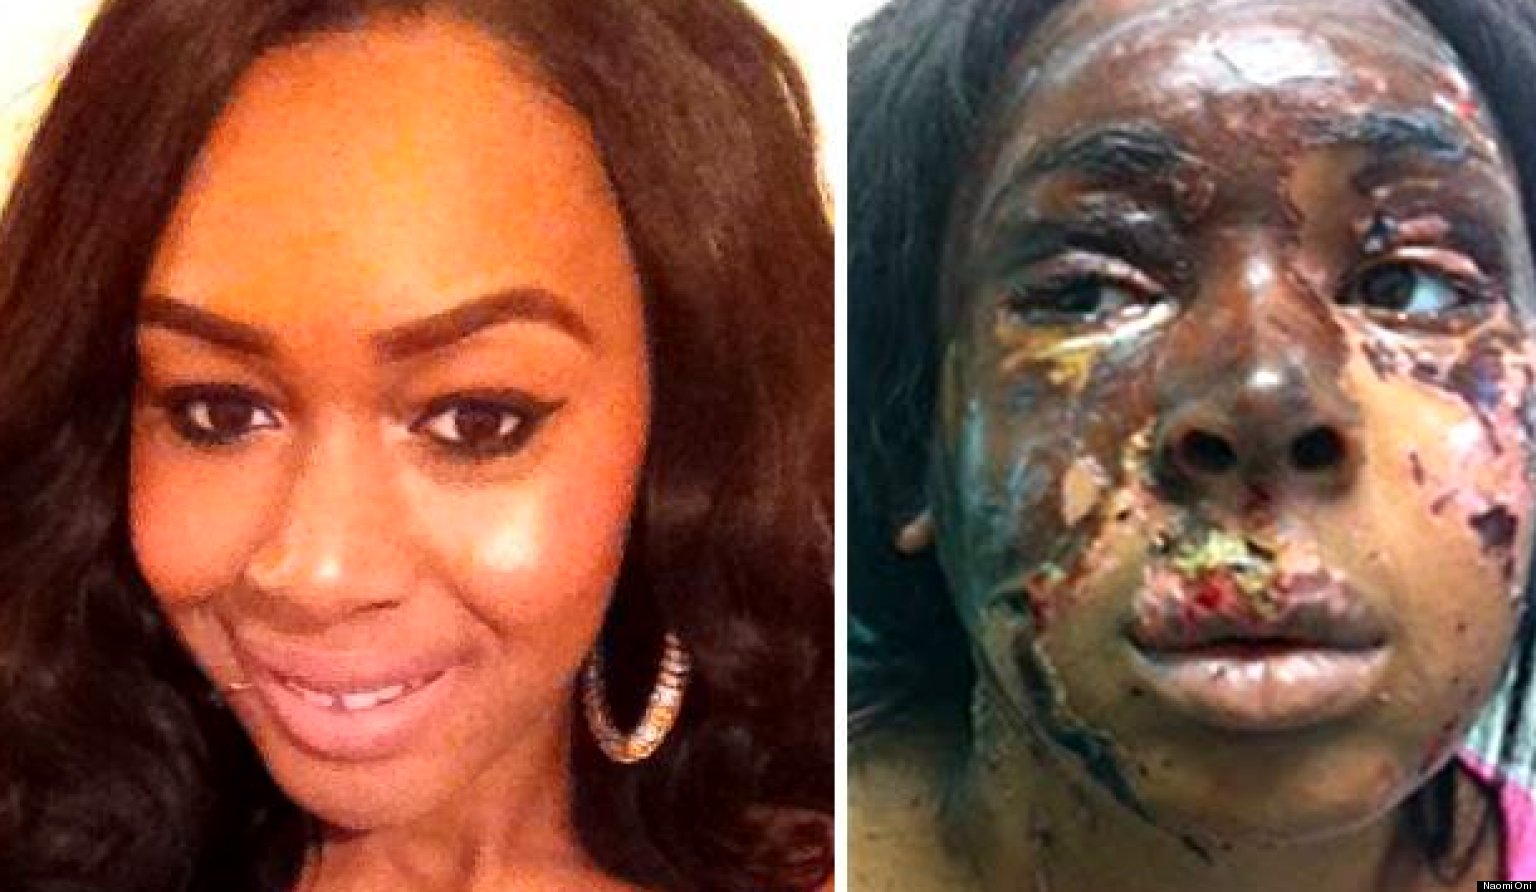 London Acid Attack: Naomi Oni Severely Burned, Partially Blind After